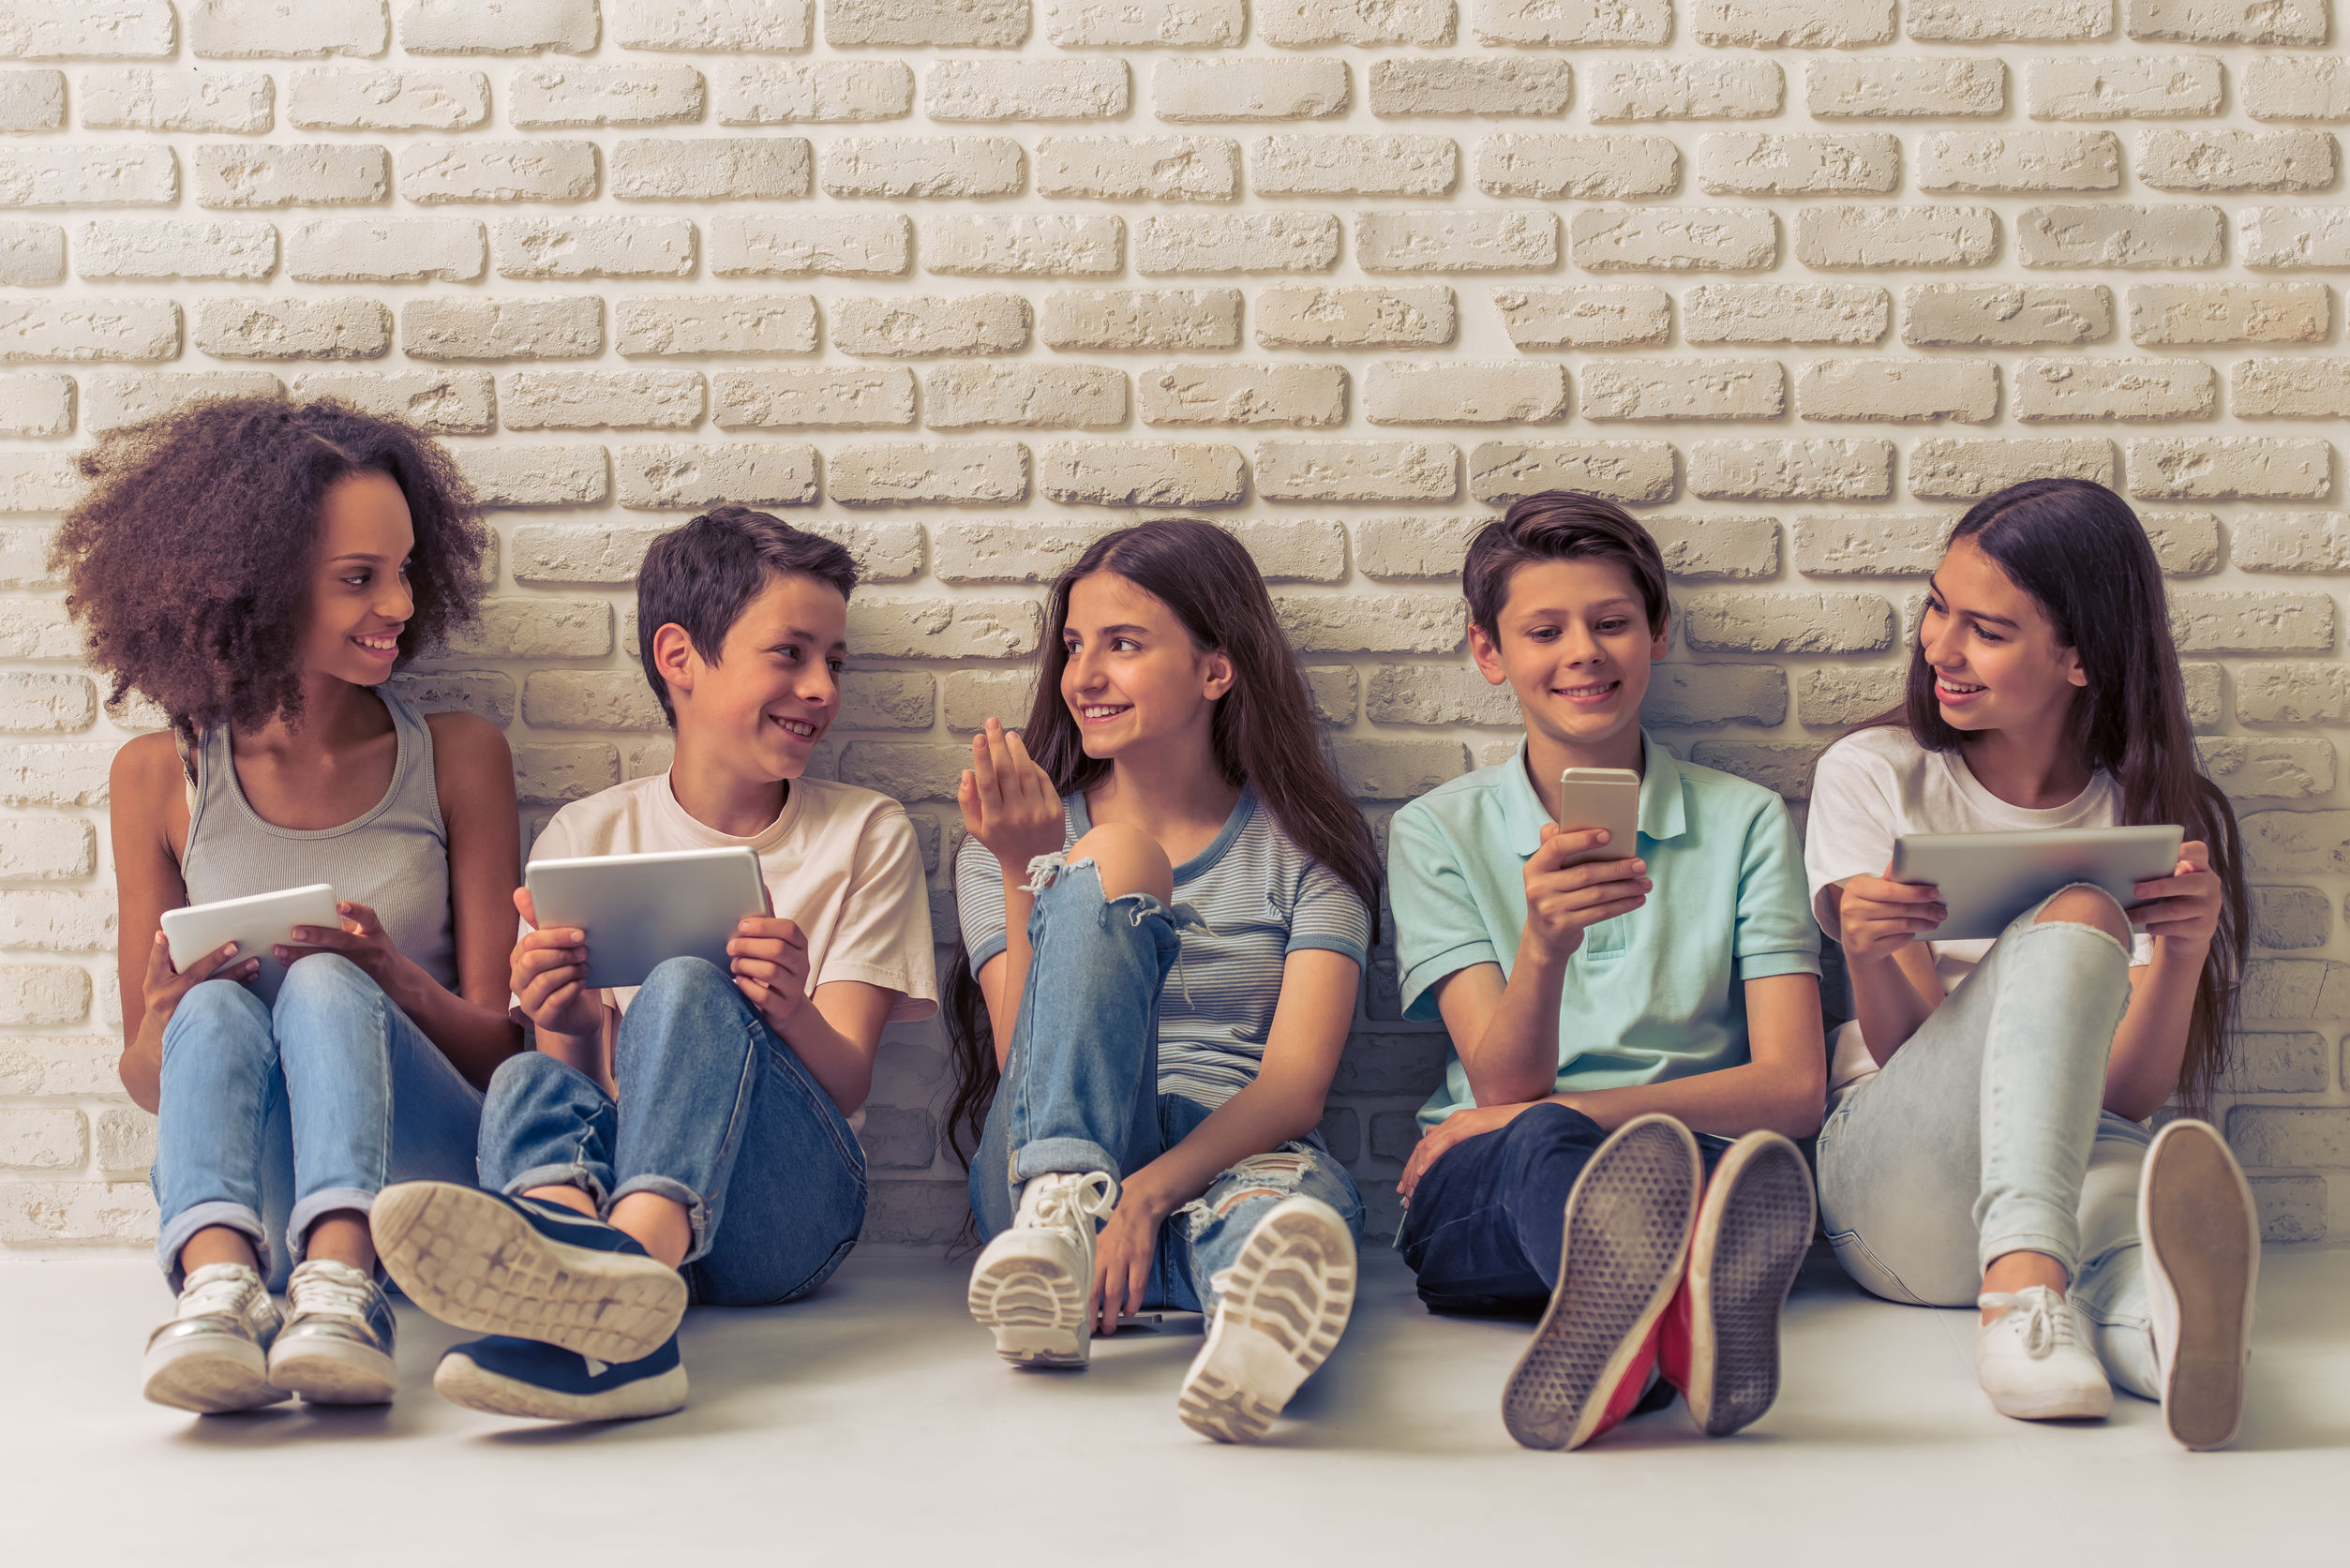 Group of teenage boys and girls is using gadgets, talking and smiling, sitting against white brick wall